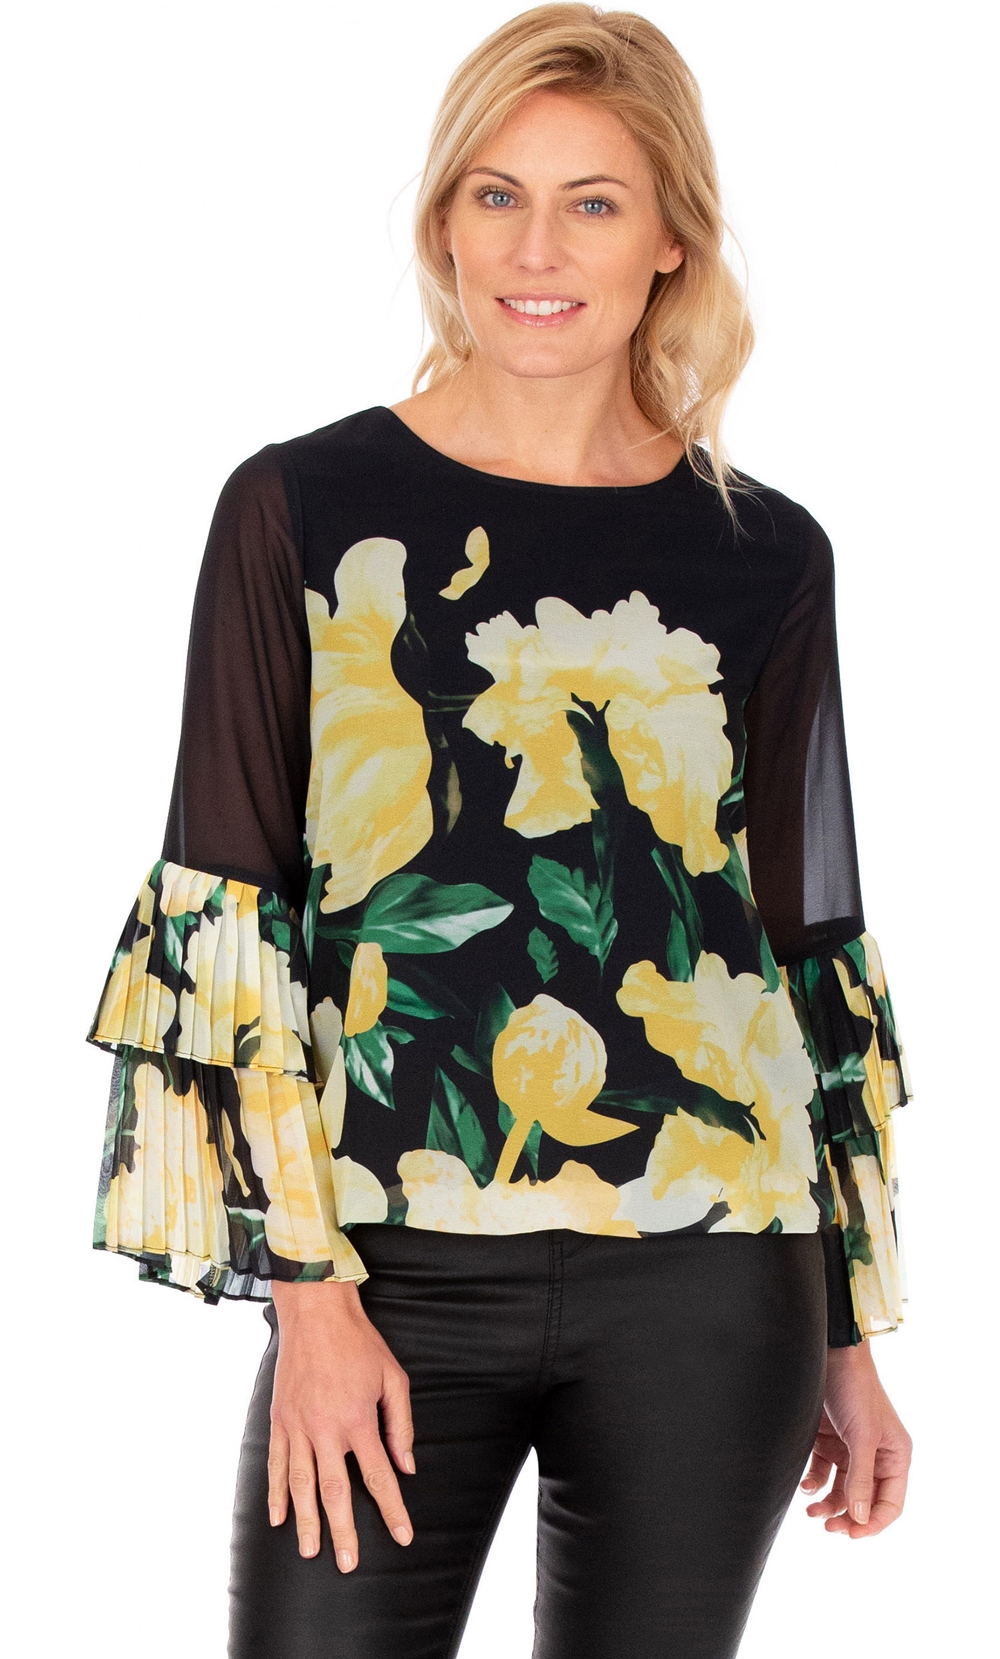 Floral Printed Layered Pleated Cuff Top